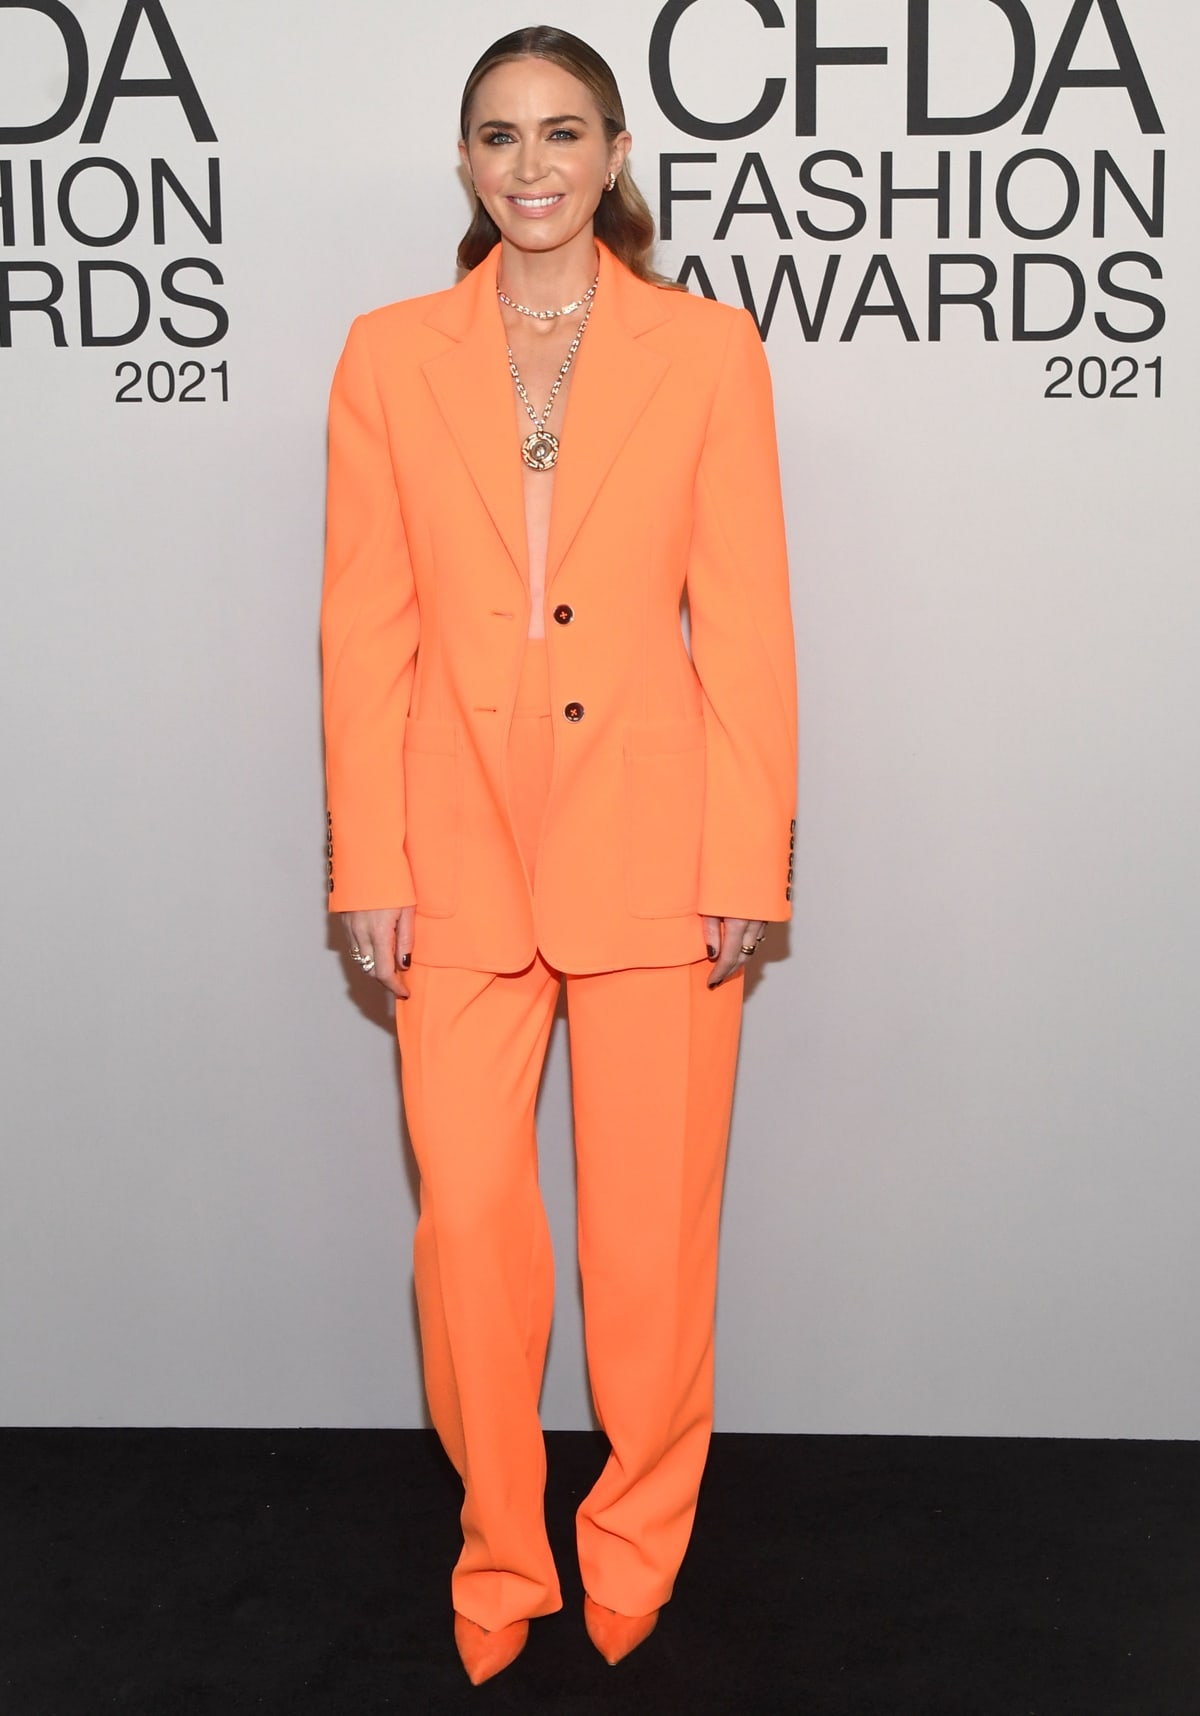 Emily Blunt rocks a BVLGARI High Jewelry Monete necklace in a tangerine Christopher John Rogers Resort 2022 suit and matching Titi Adesa pumps ahead of her hosting duties at the 2021 CFDA Fashion Awards